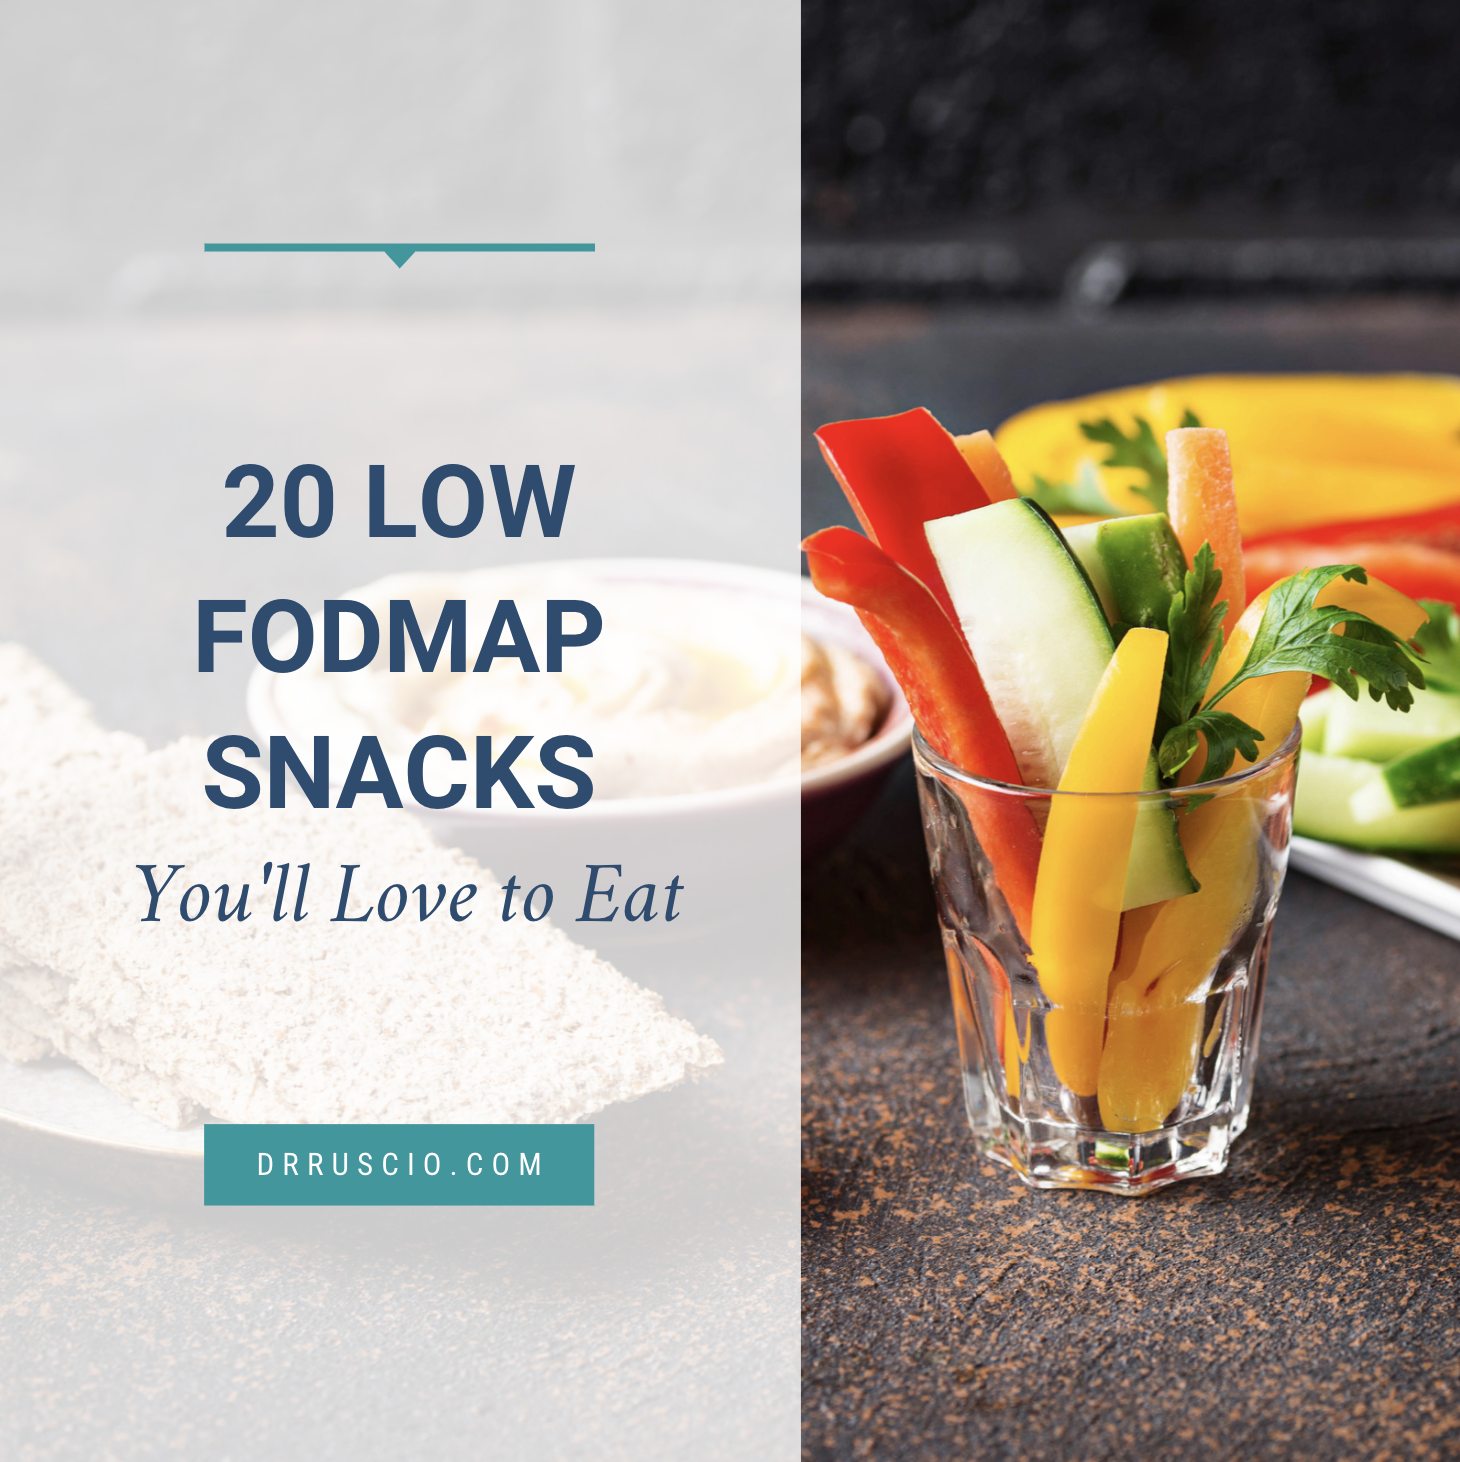 20 Low FODMAP Snacks You’ll Love to Eat